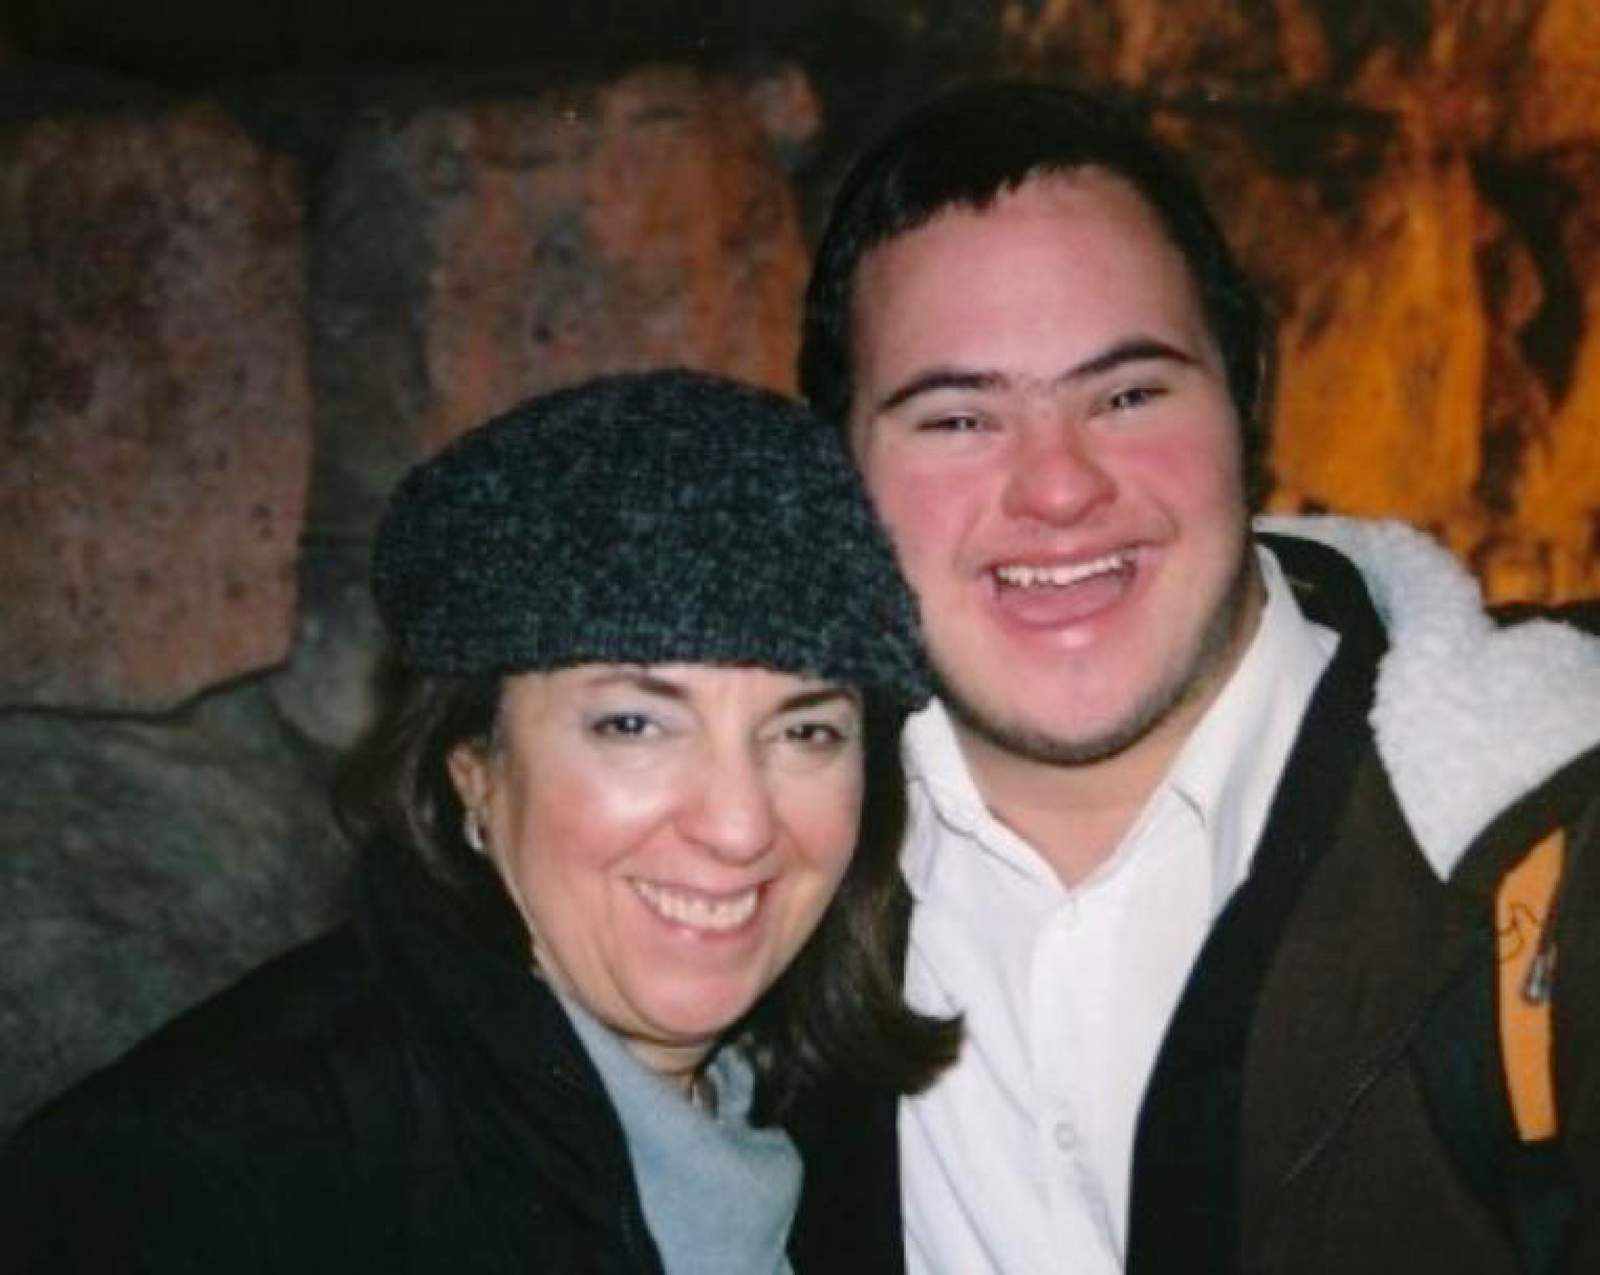 Lives Lost: For man with Down syndrome, a college dream